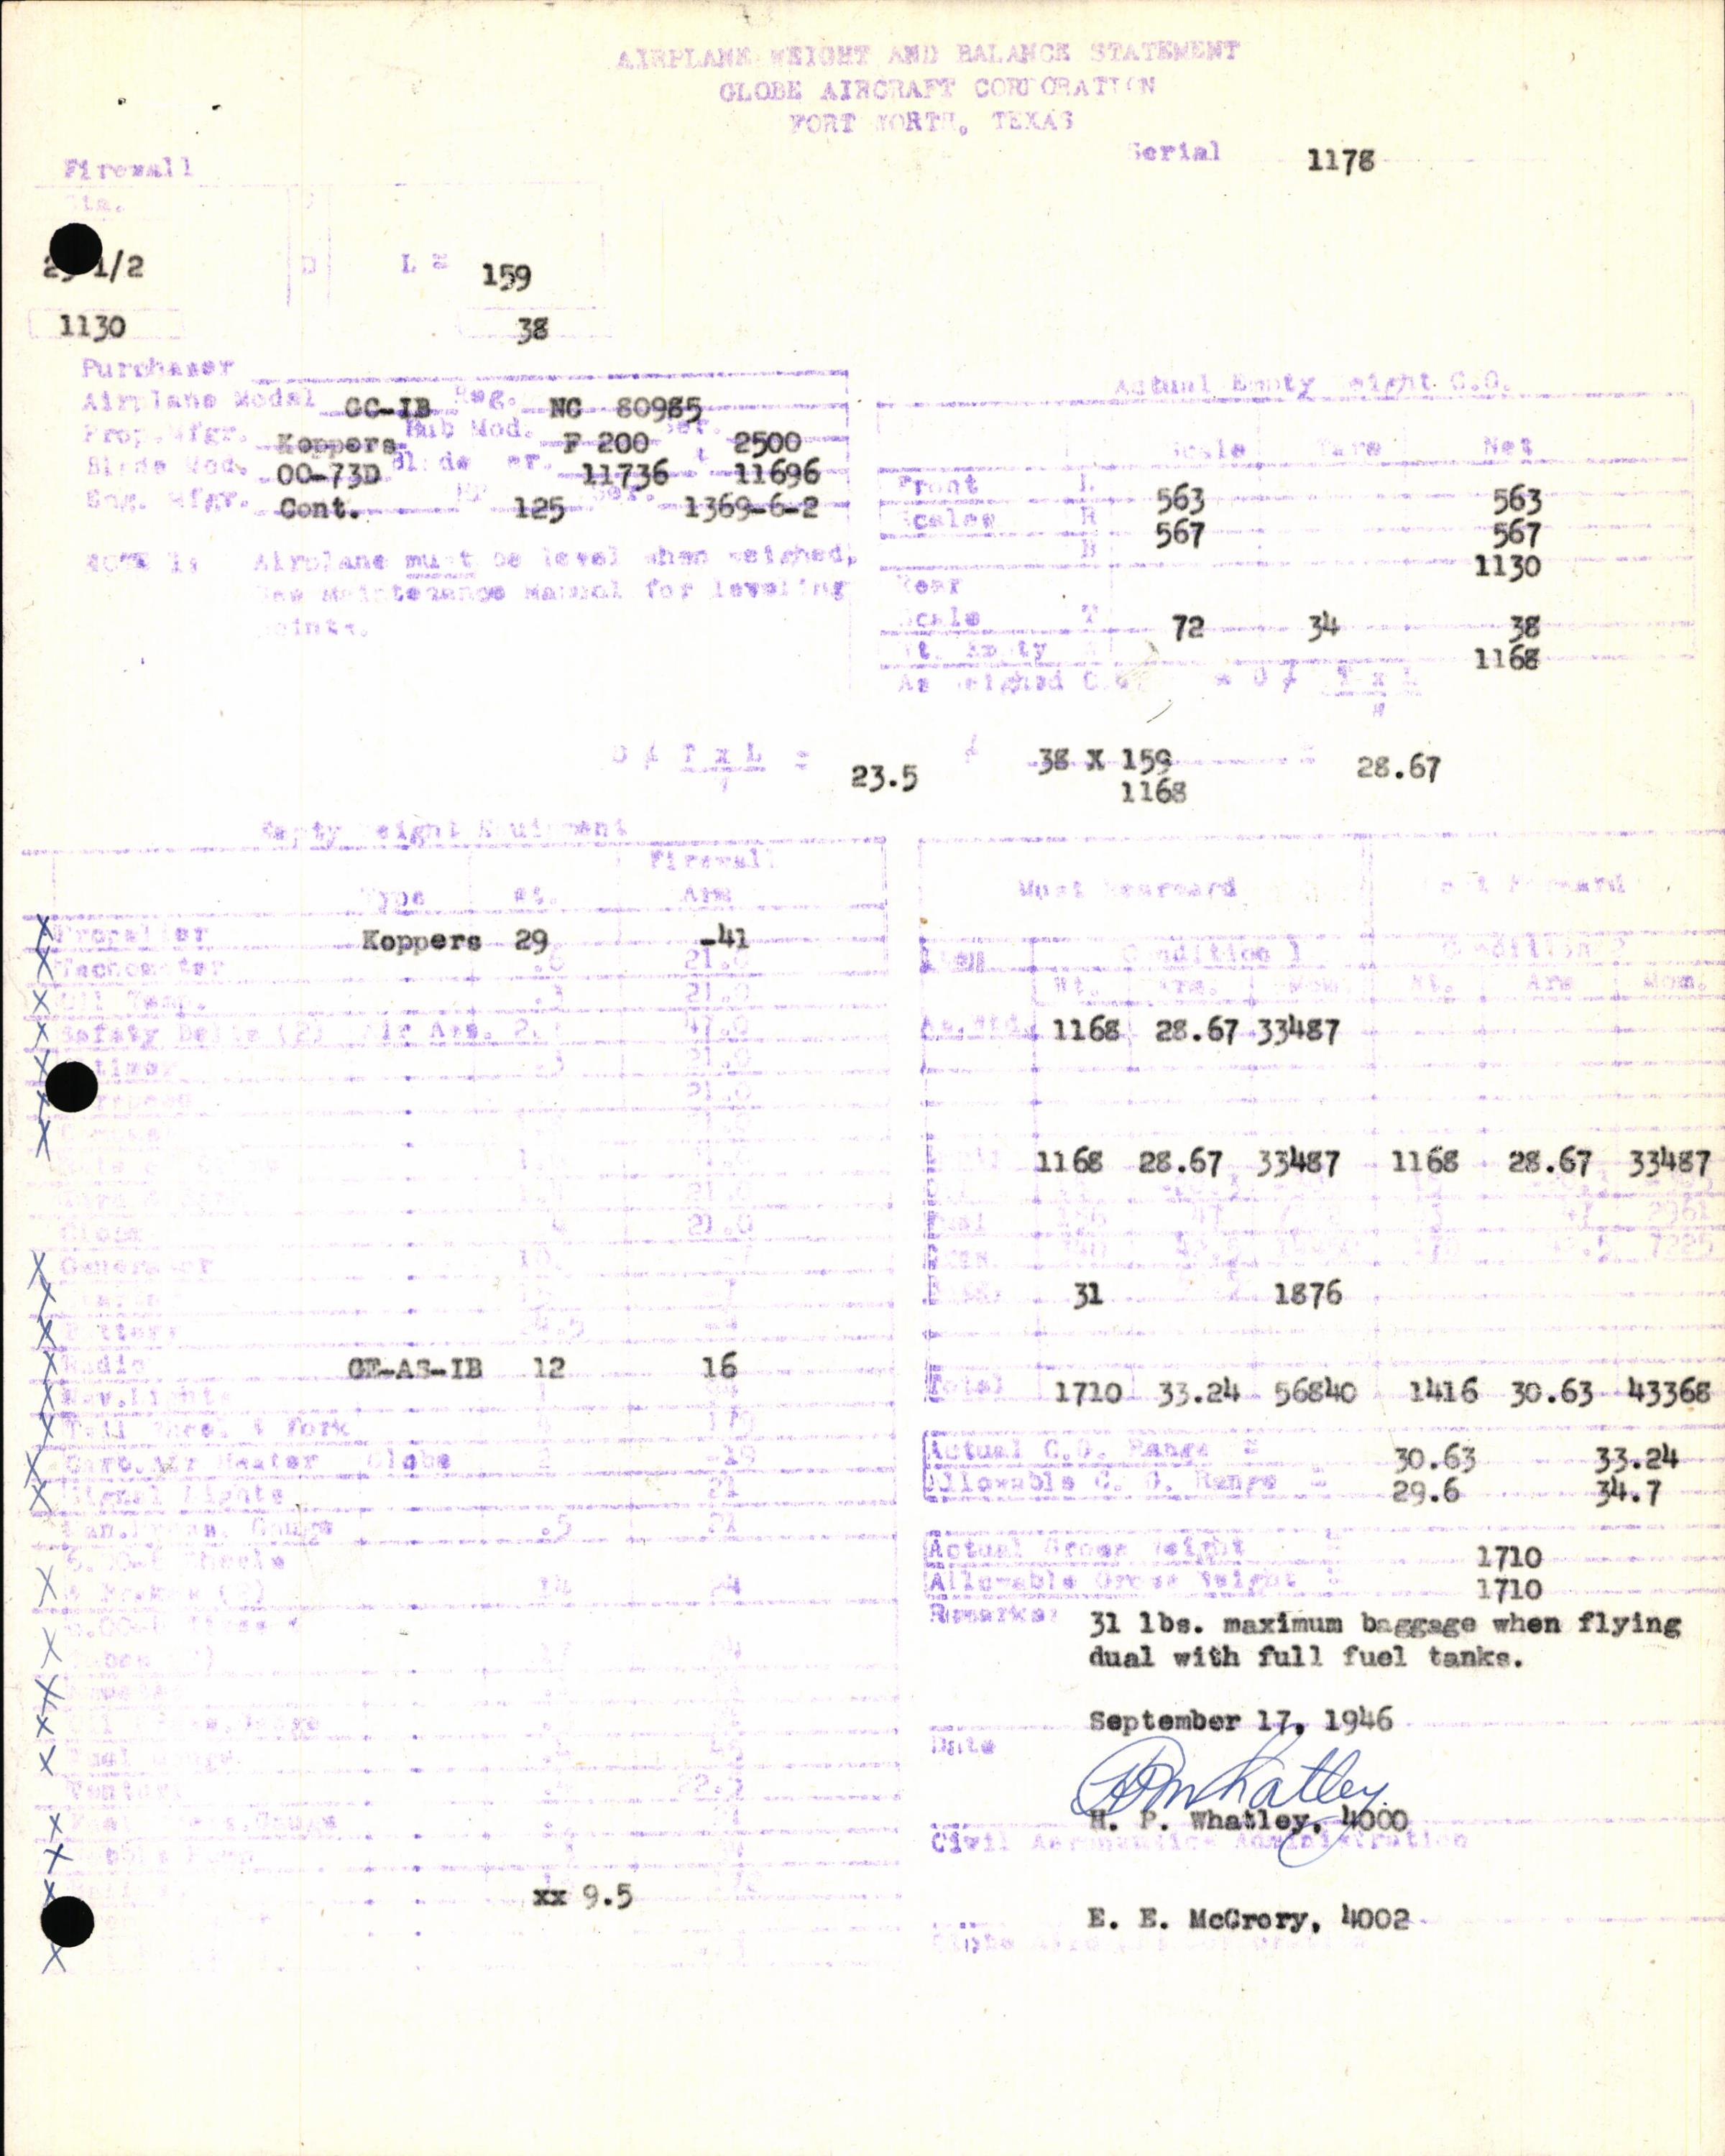 Sample page 5 from AirCorps Library document: Technical Information for Serial Number 1178